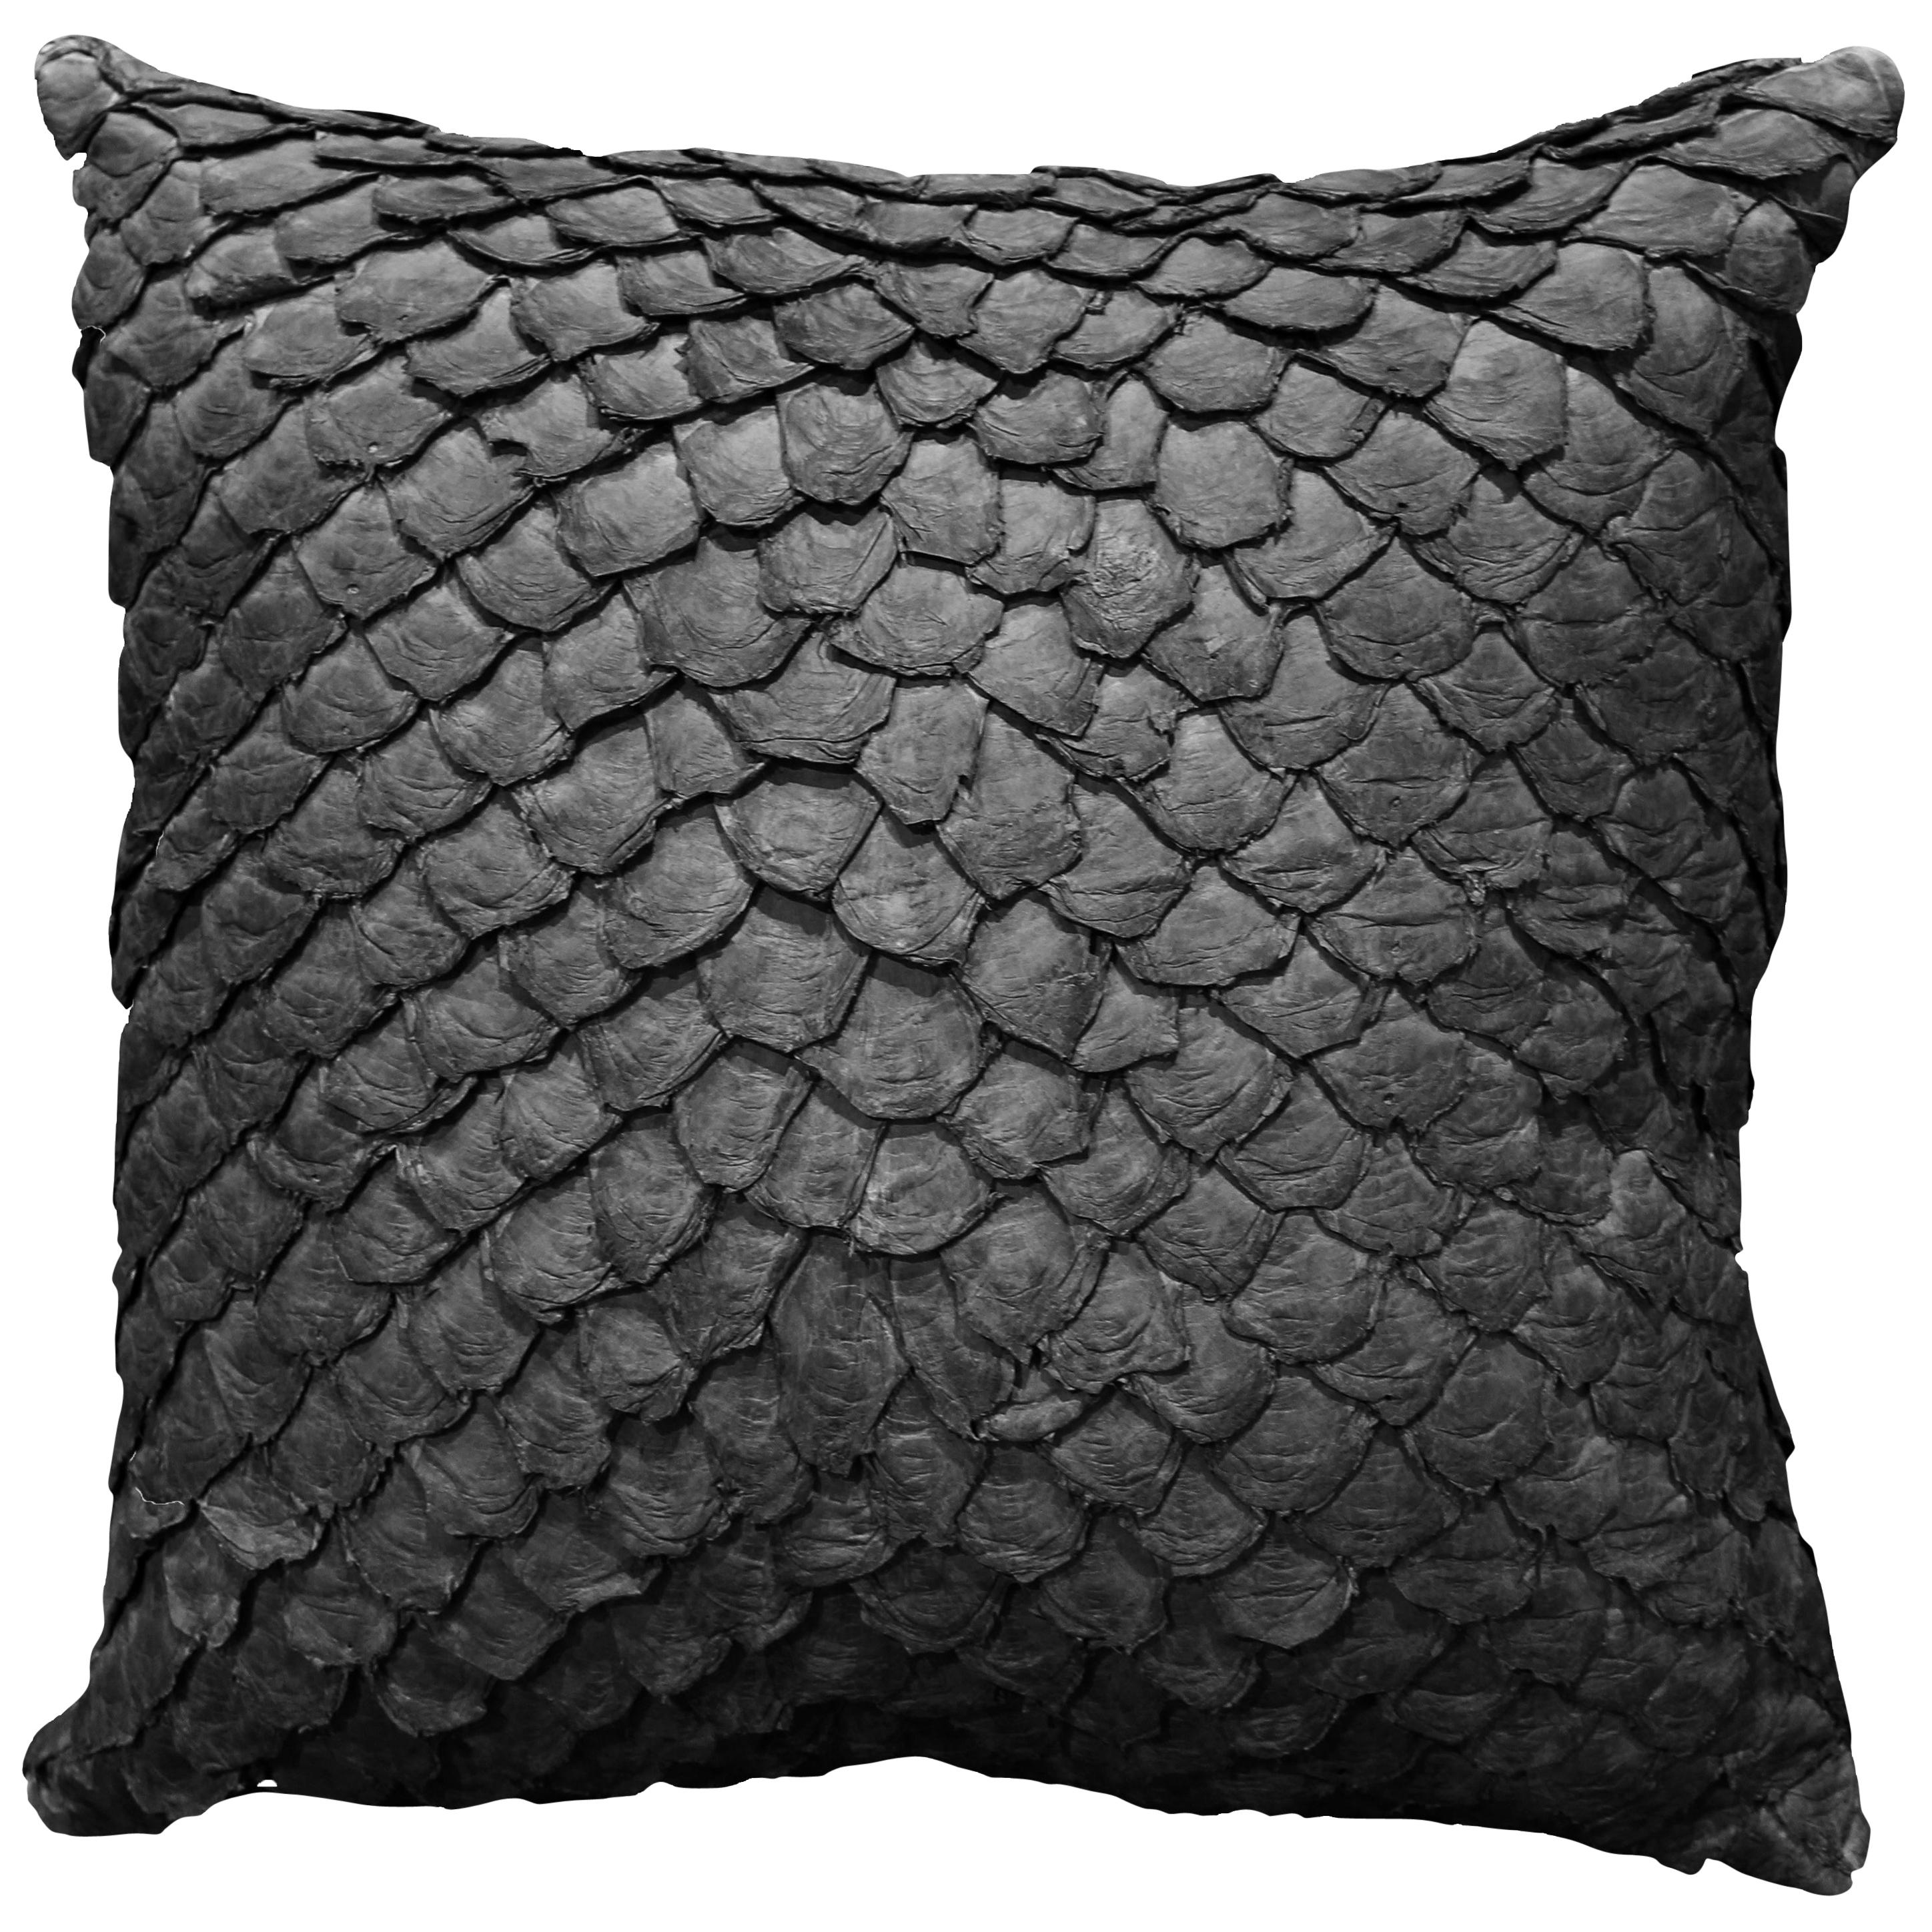 Leather Cushion, Made with Exclusive Pirarucu Fish Leather Black Large Size